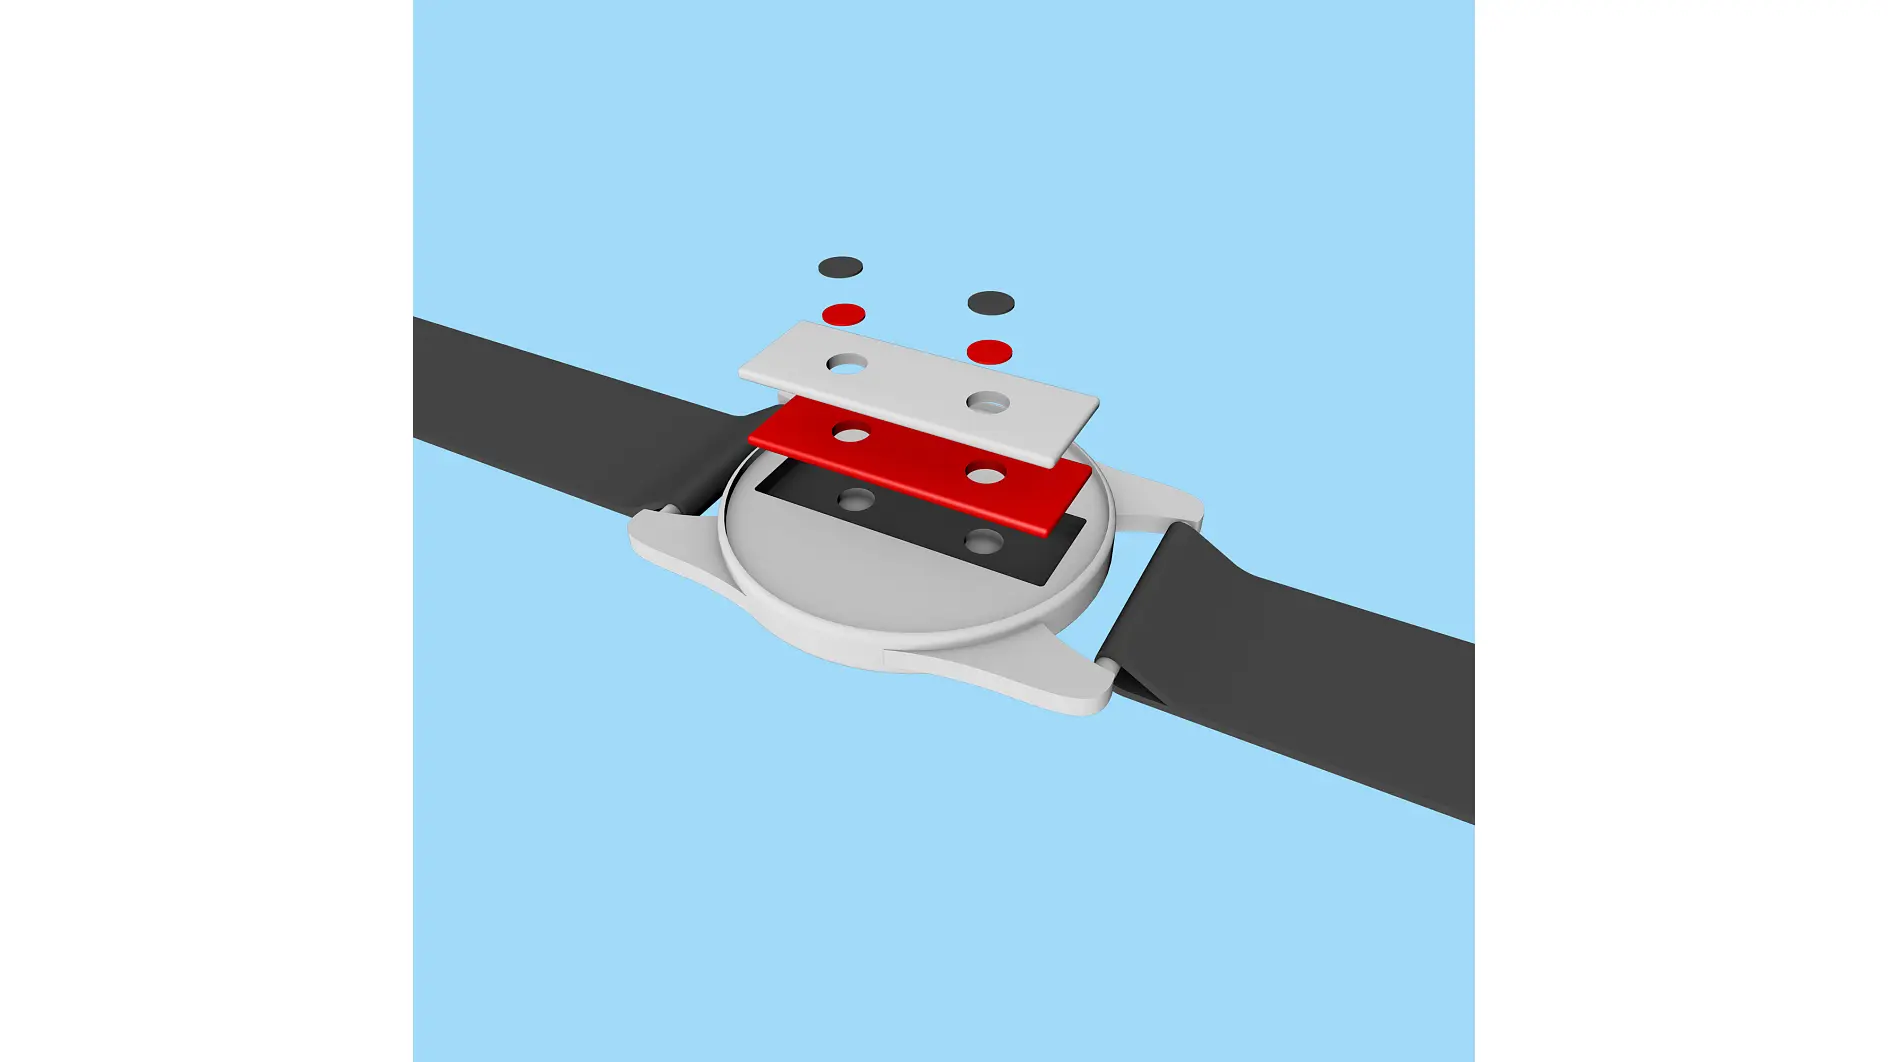 The housing of a smartwatch contains a large number of highly sensitive electronic components that are bonded together using adhesive tape. tesa produces its high-tech tapes in different thicknesses in the cleanroom unit at the Hamburg-Hausbruch plant.